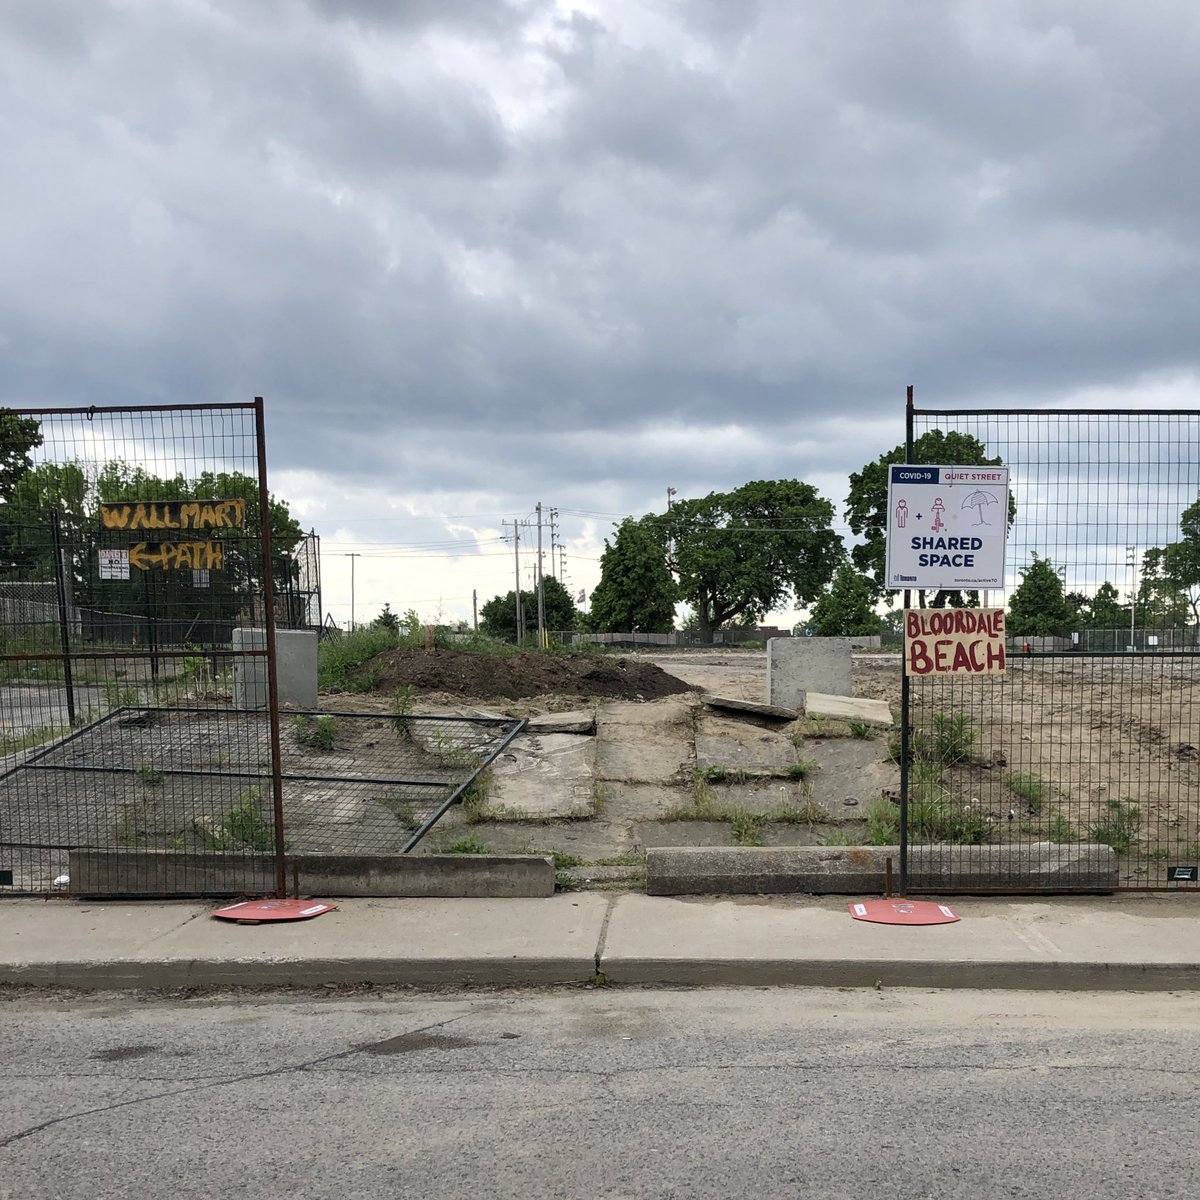 Not a bad day for the beach! When guy closed the beach Tues, he flipped the original beach sign and wrote Walmart Path bc TDSB actually cut out a chunk of Bloordale Meadow’s fence on the Beer Store side, so you can also cut across the Meadow from 3 Speed Alley to Duff Mall.